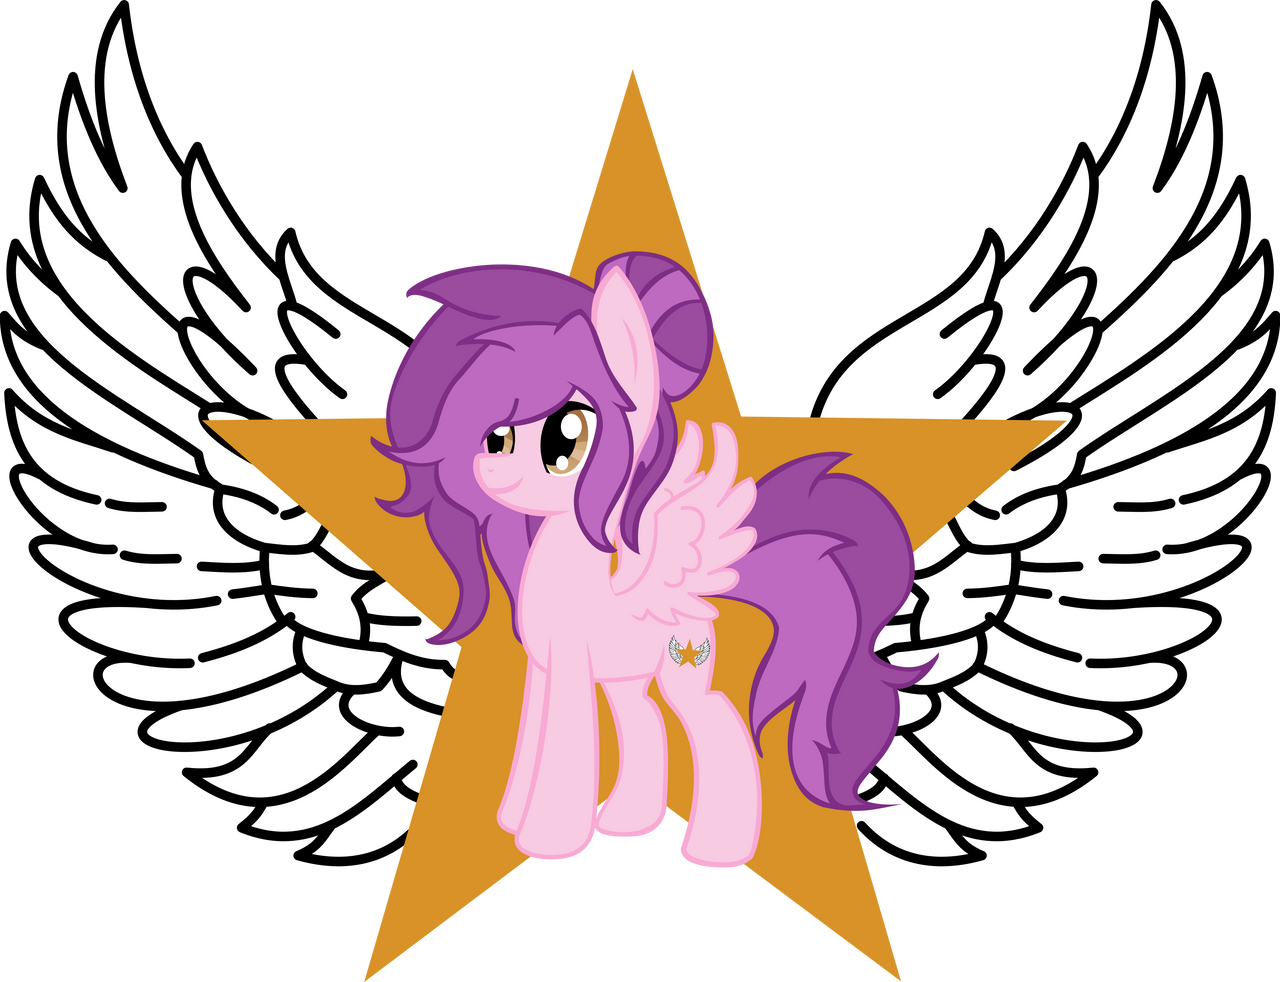 request__golden_fly_s_oc_golden_fly_vector_by_arroyopl-d5ygmt9.png